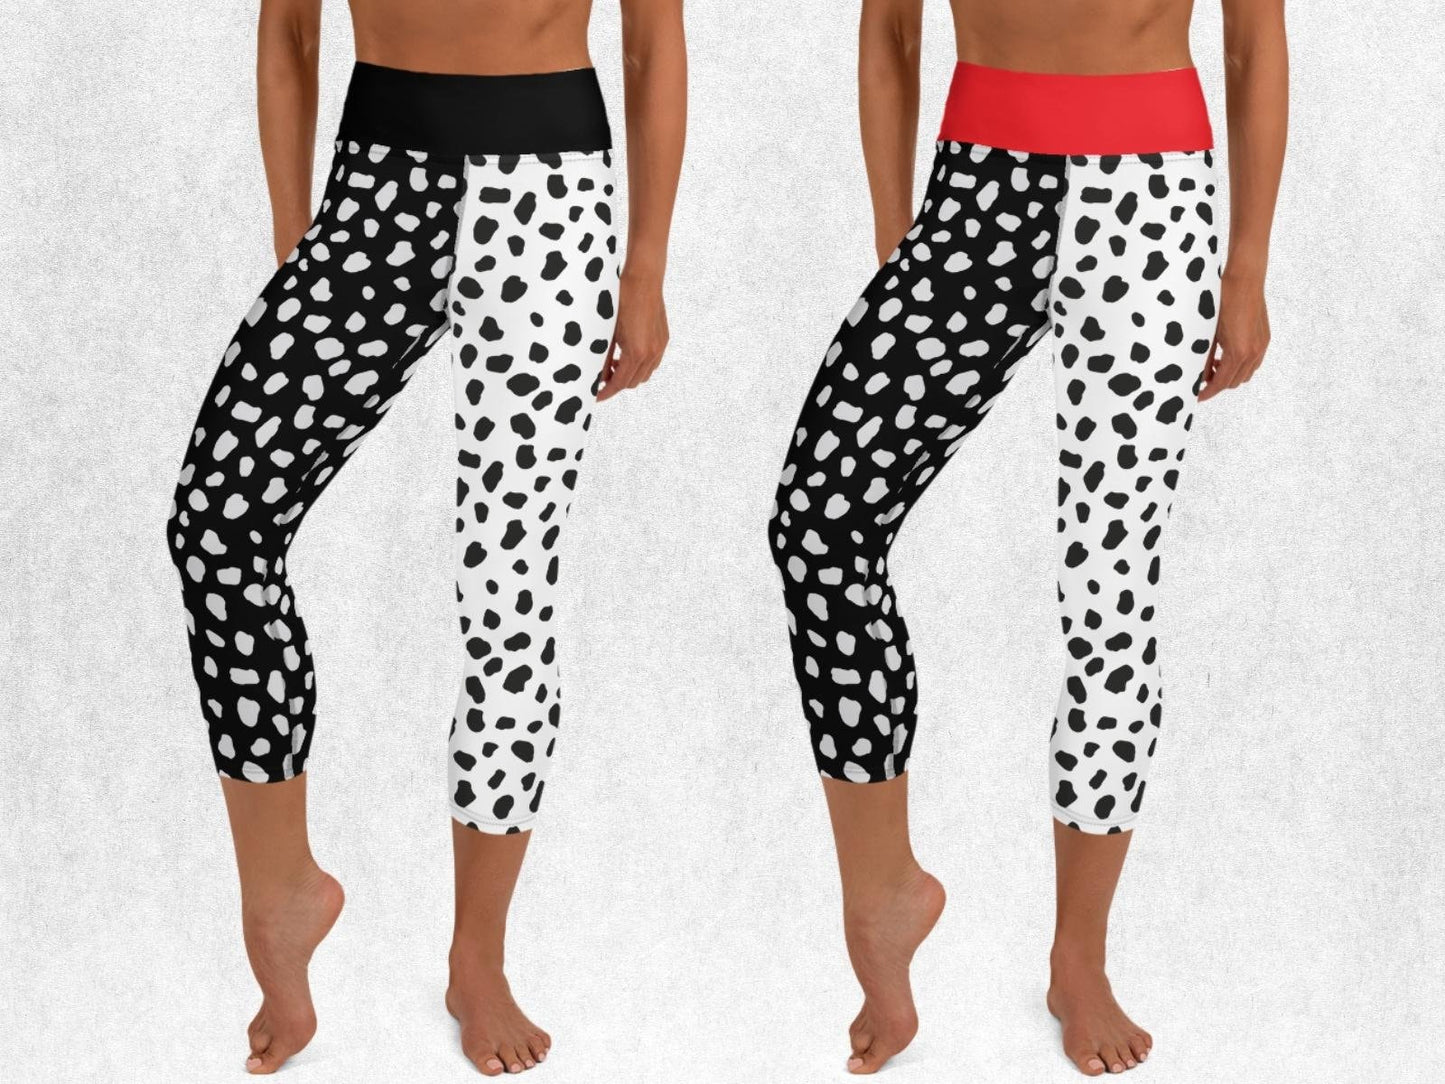 Cruel lady Inspired Yoga Capris, Woman Cosplay, Dalmatians, Adult Halloween Costume, Gift for Her, Cosplay Outfit, Gift for Daughter